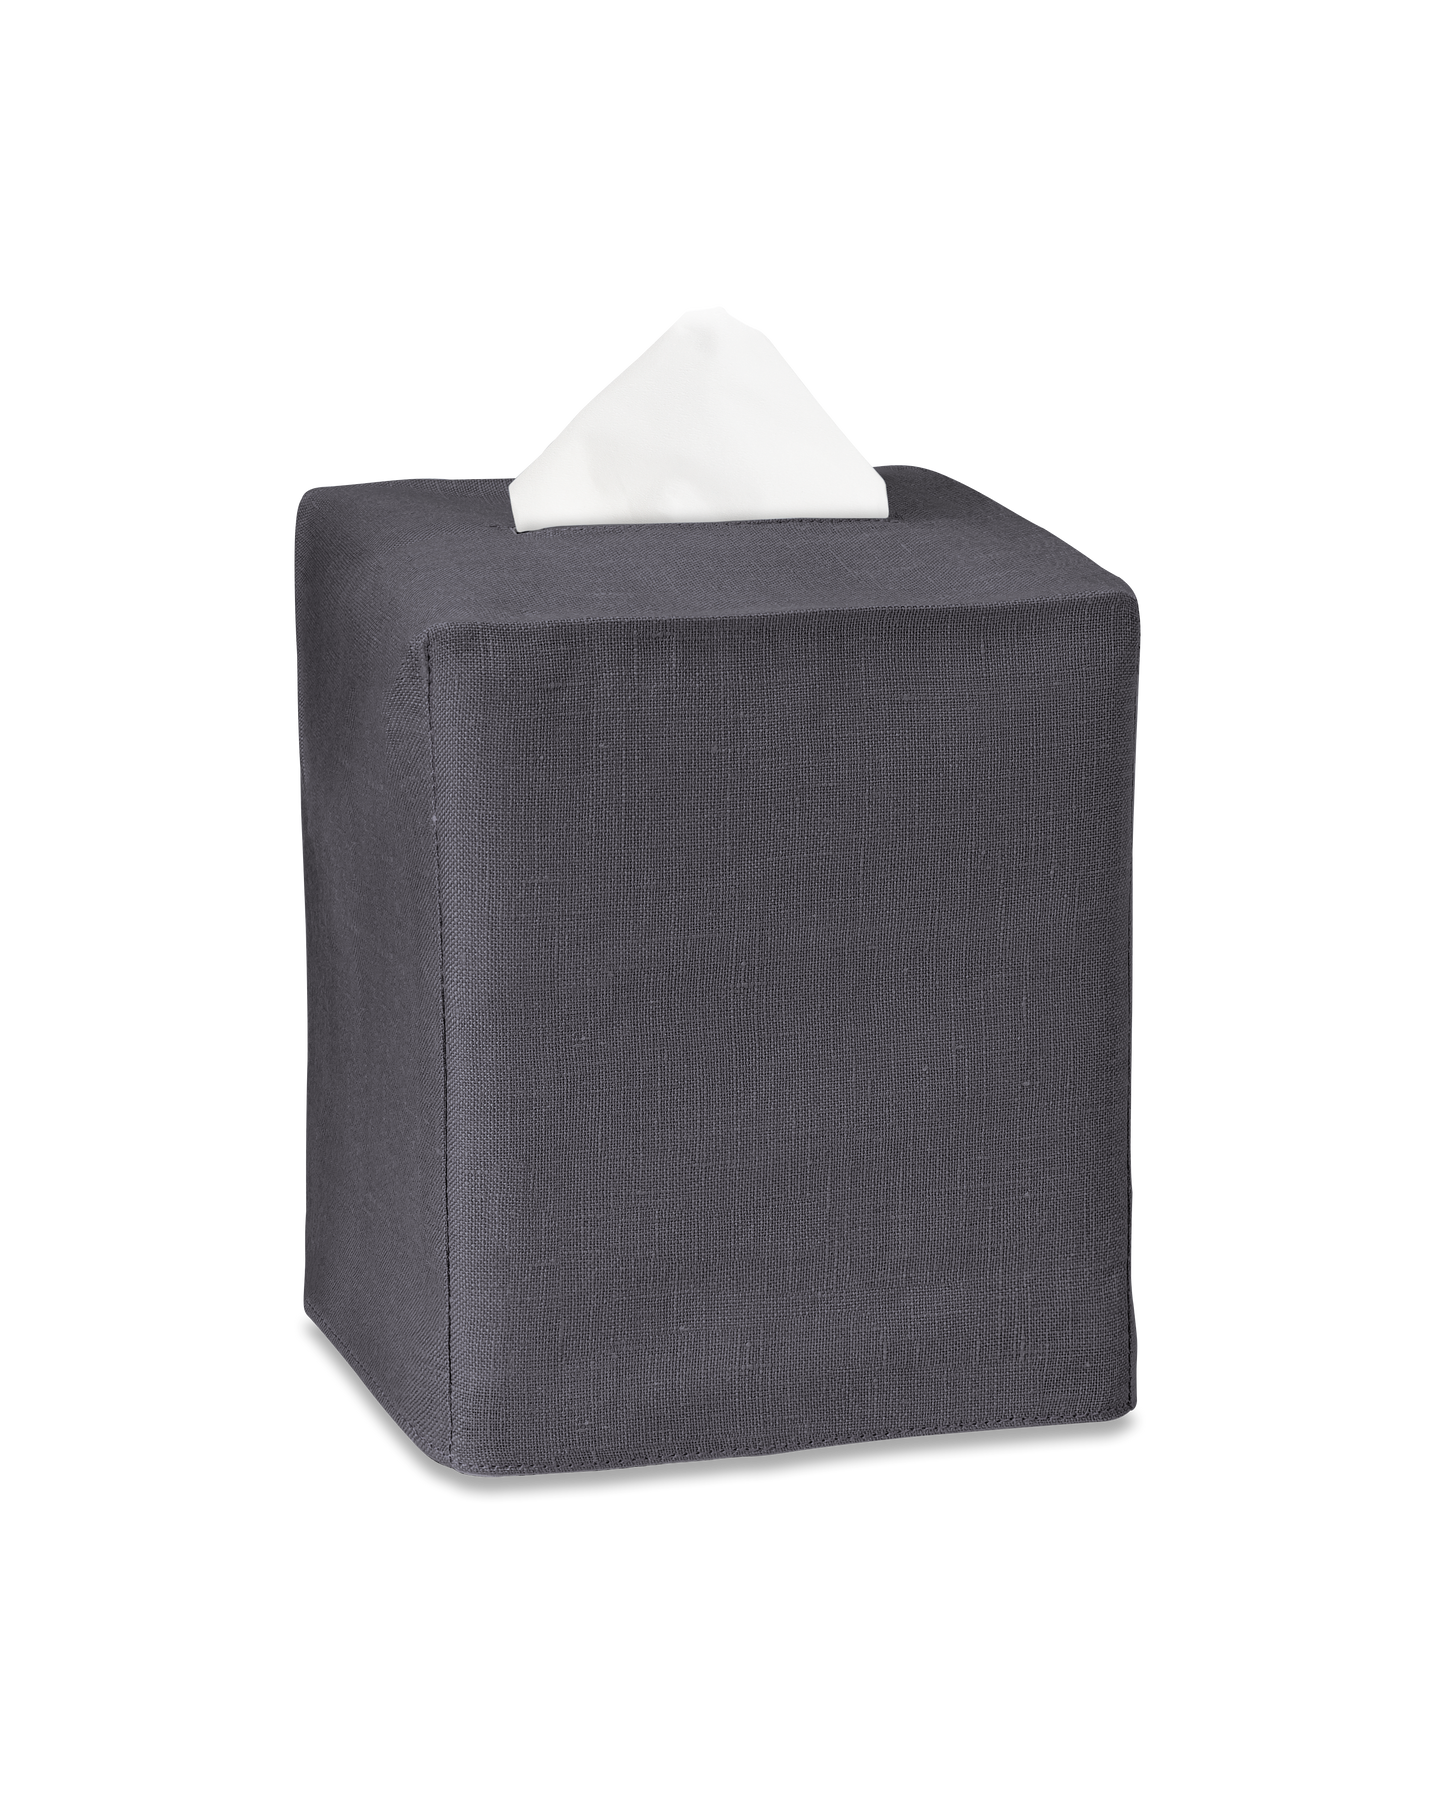 A charcoal linen tissue box cover